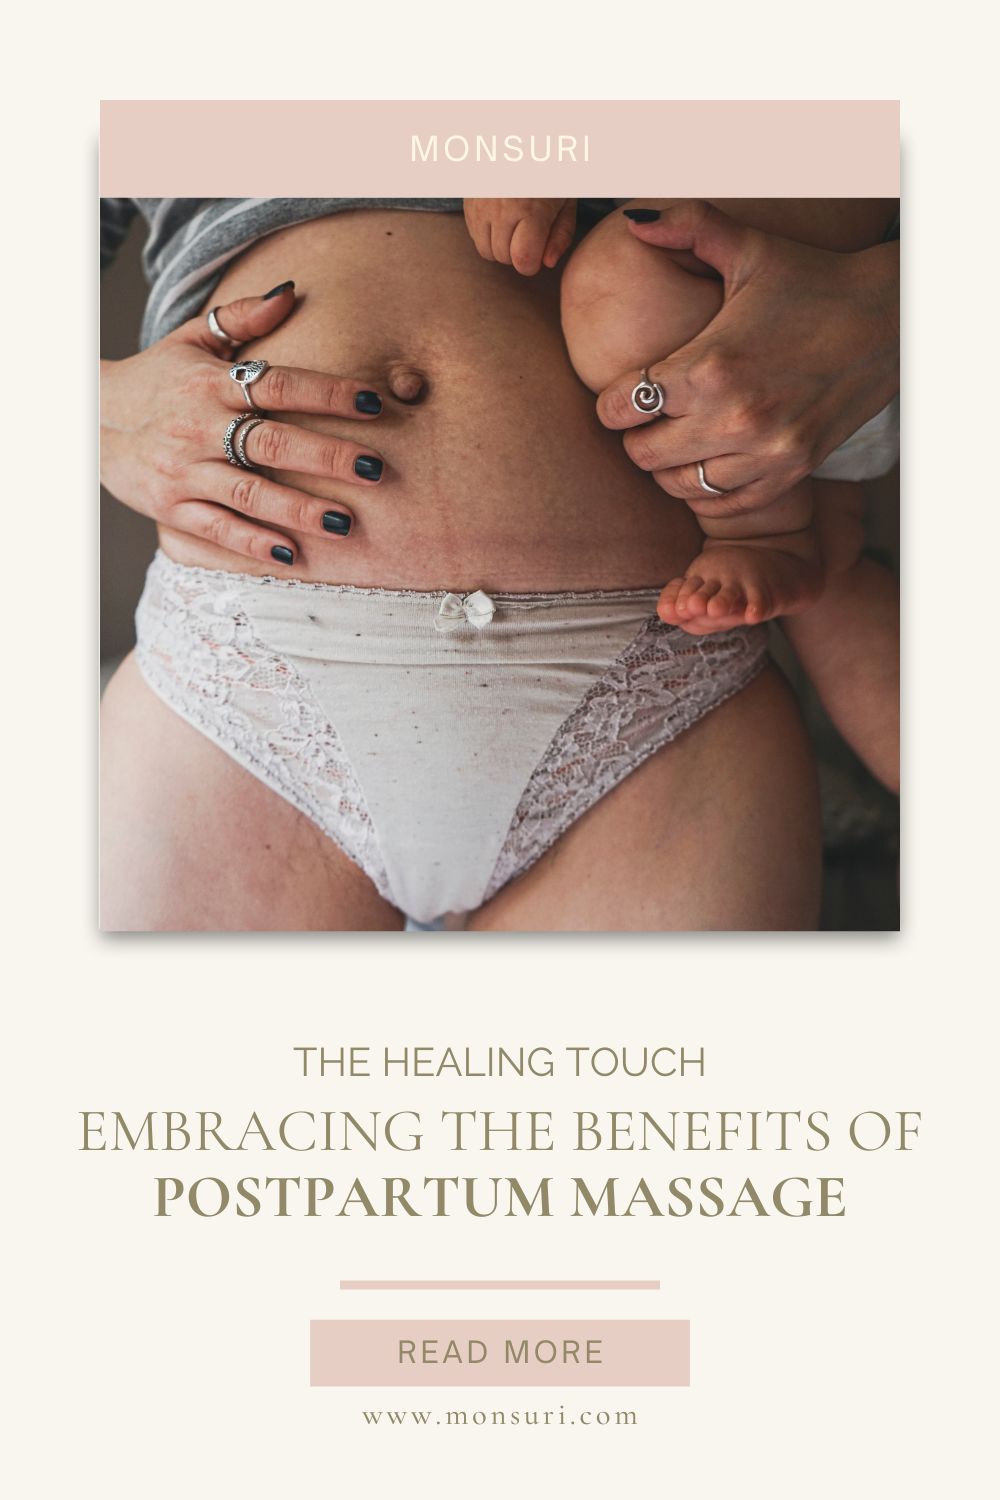 Postpartum massage techniques to improve sleep and breastfeeding for new mothers.